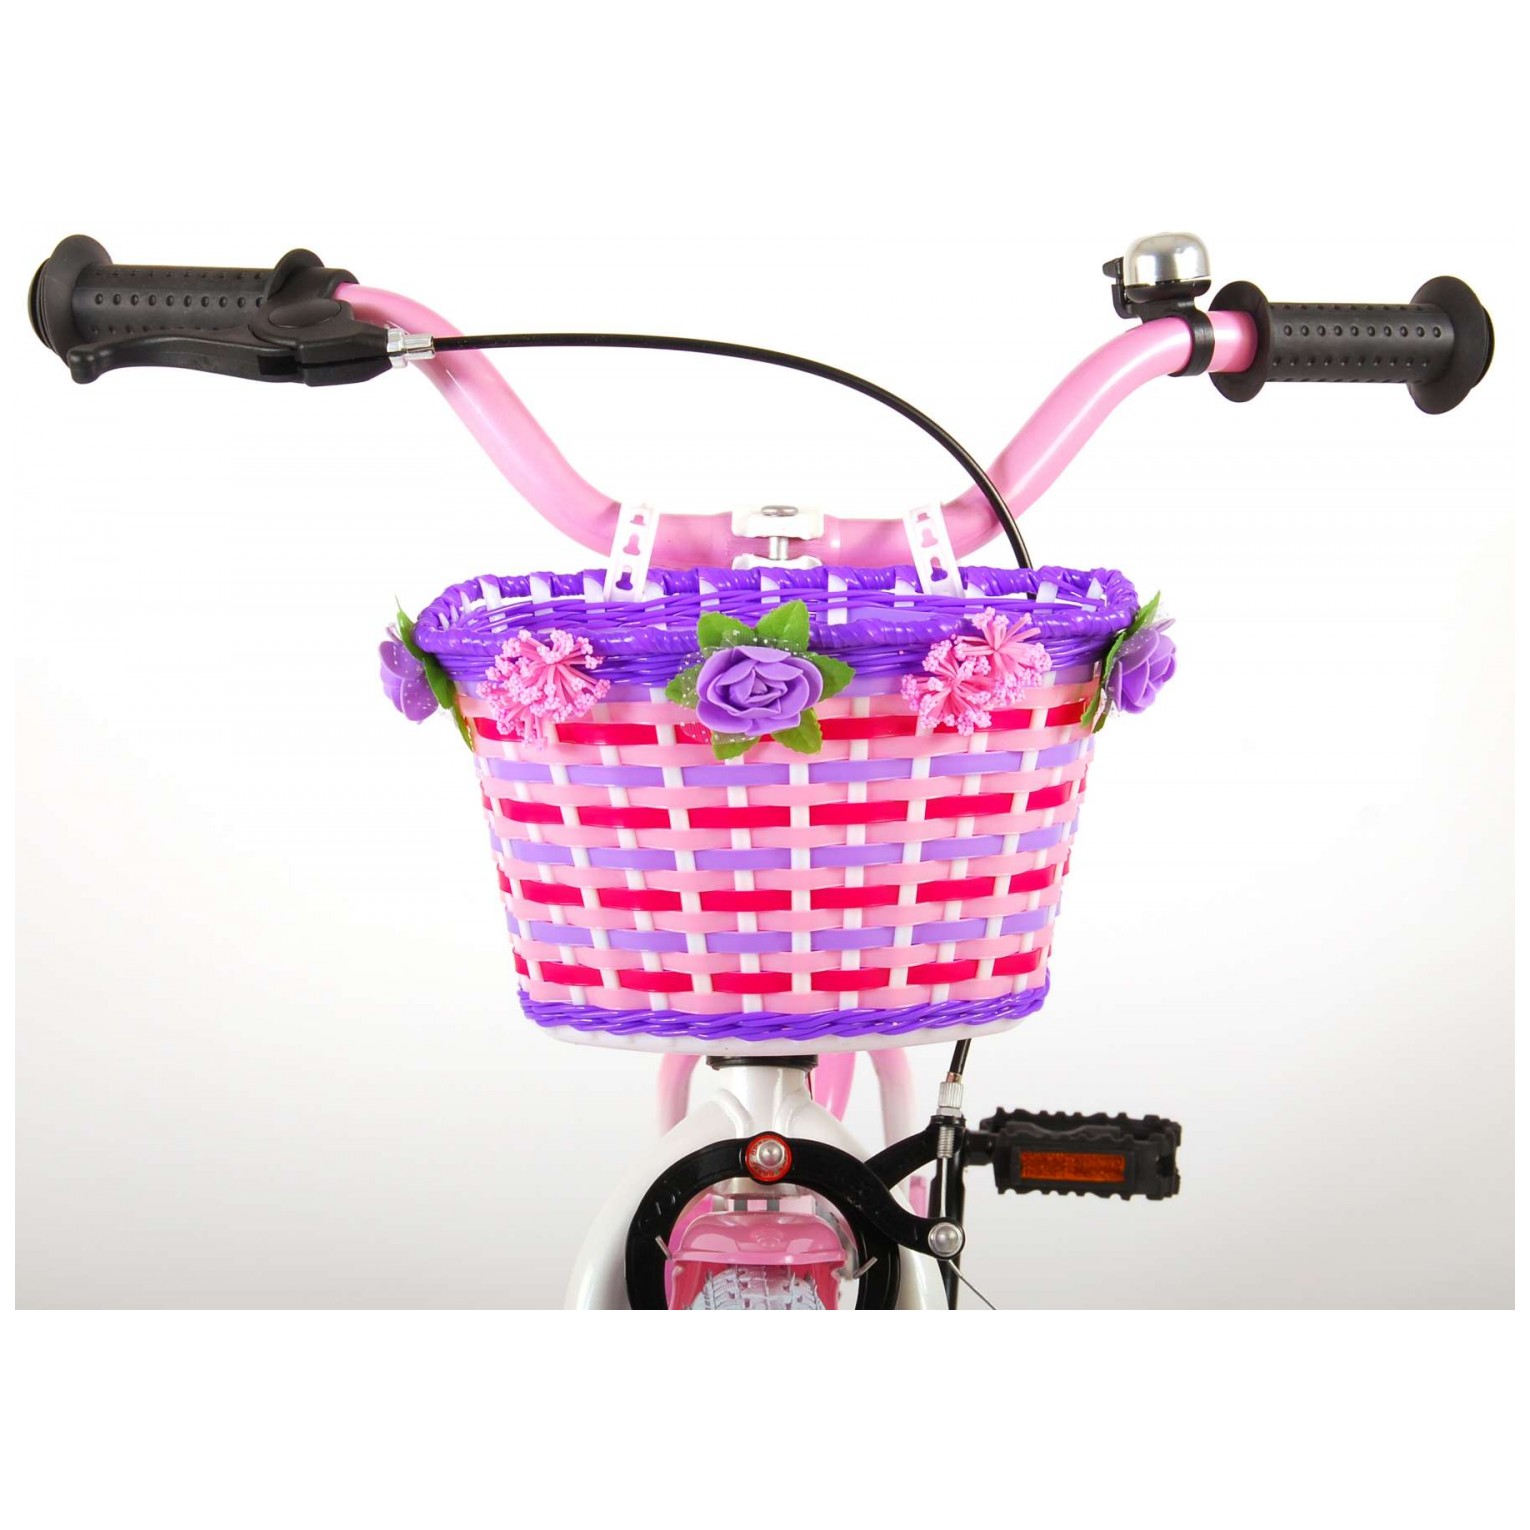 Volare Rose Fiets - 16 inch - Roze Wit